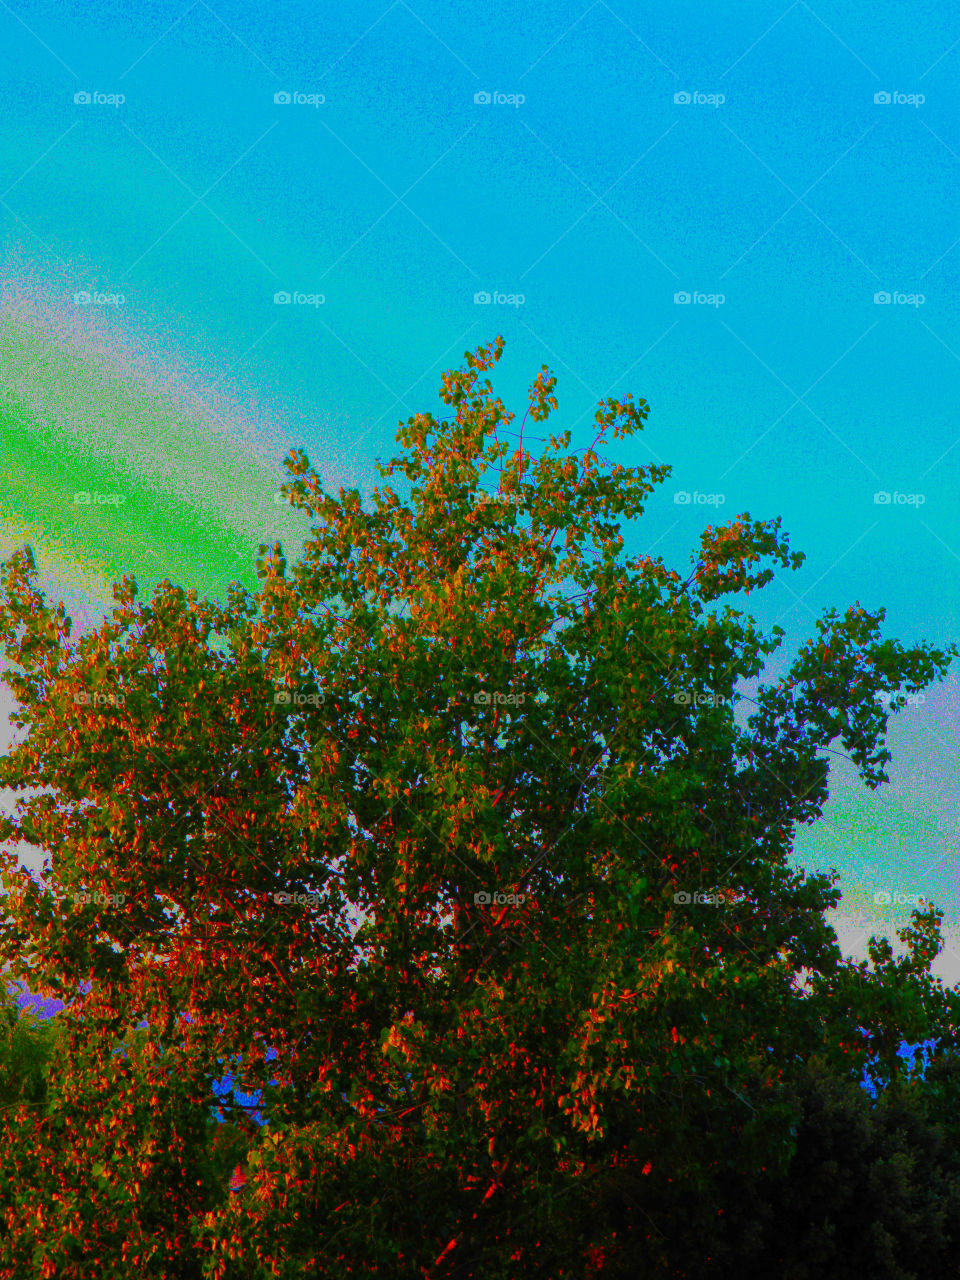 Summer landscape with a colorful tree and a degraded sky background.